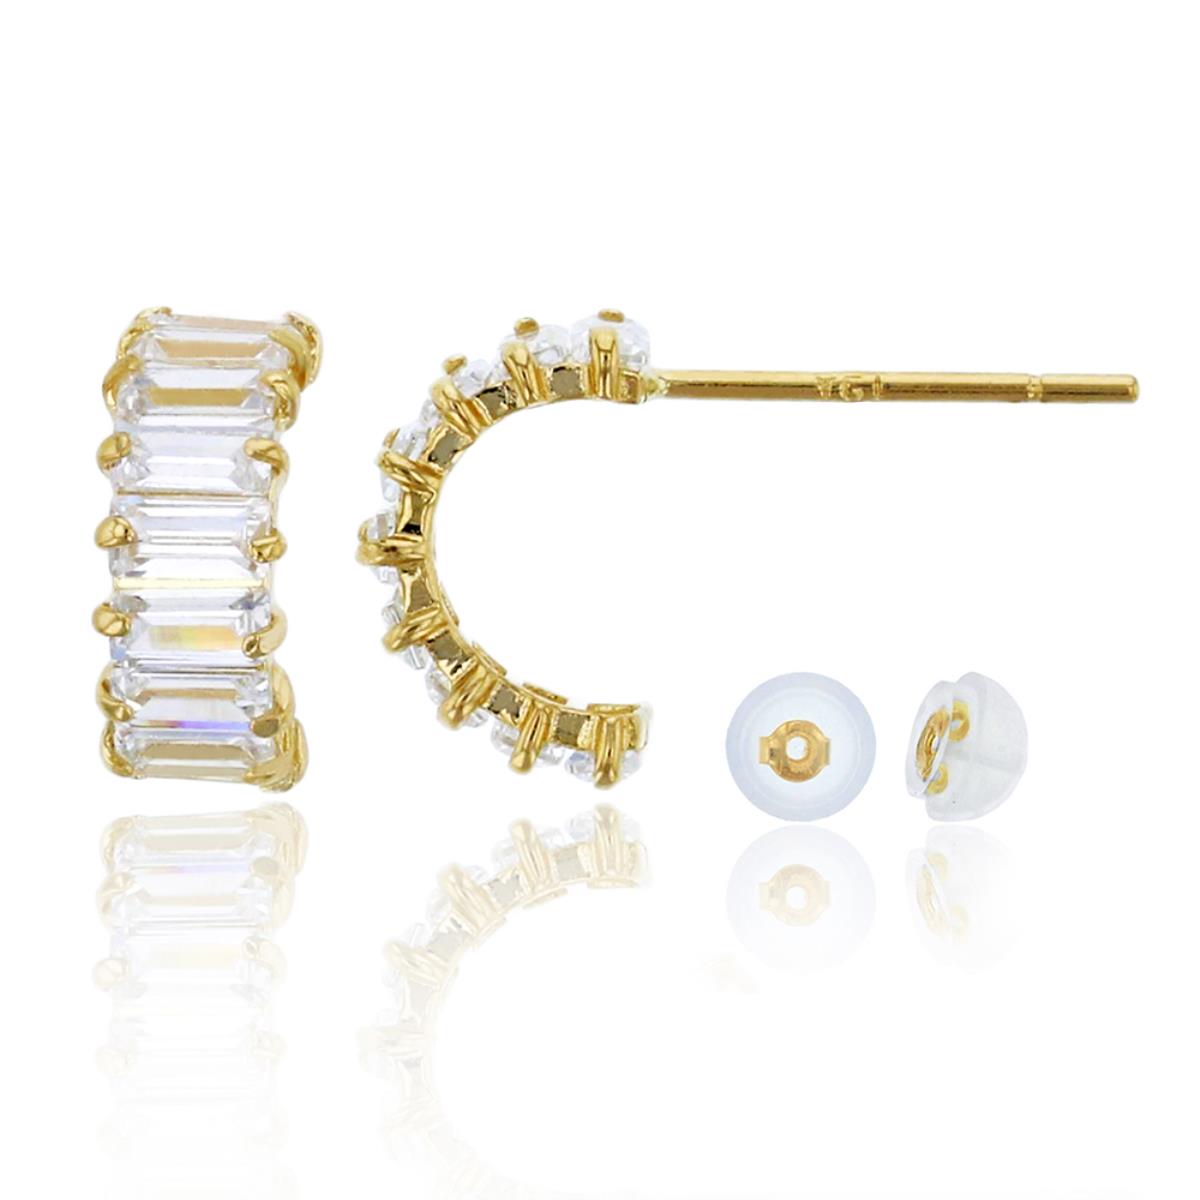 10K Yellow Gold Prong 3x1.5mm Baguette Half Hoop Stud Earring & 10K Silicone Back